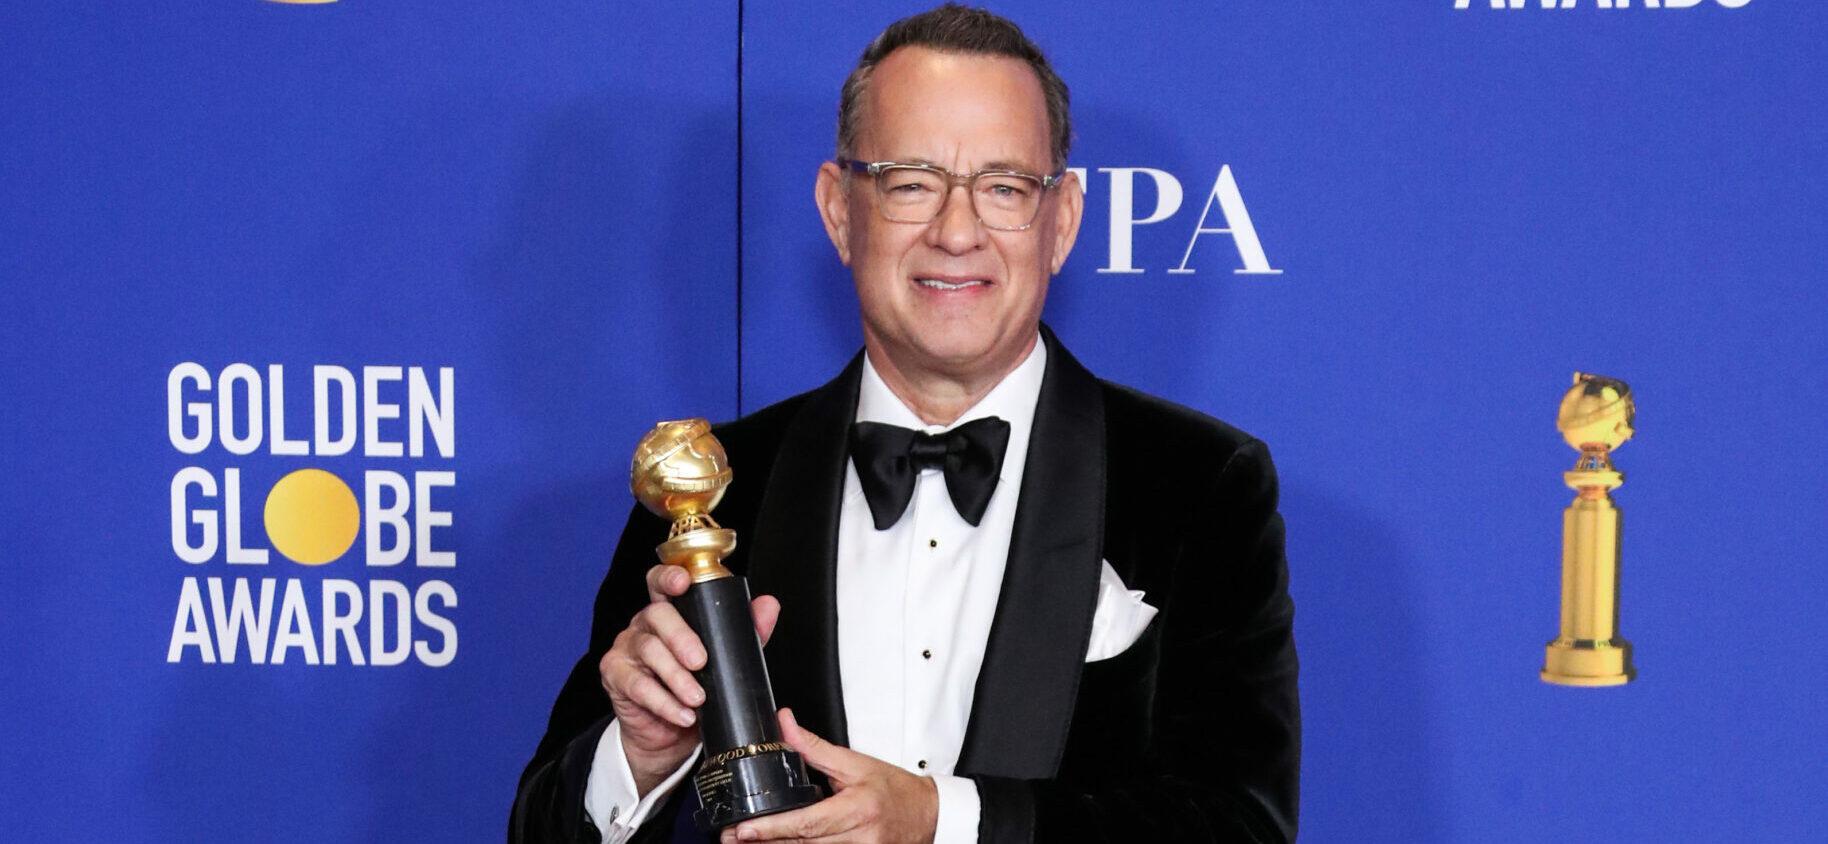 Actor Tom Hanks, winner of the Cecil B. Demille Award, poses in the press room during the 77th Annual Golden Globe Awards held at The Beverly Hilton Hotel on January 5, 2020 in Beverly Hills, Los Angeles, California, United States.